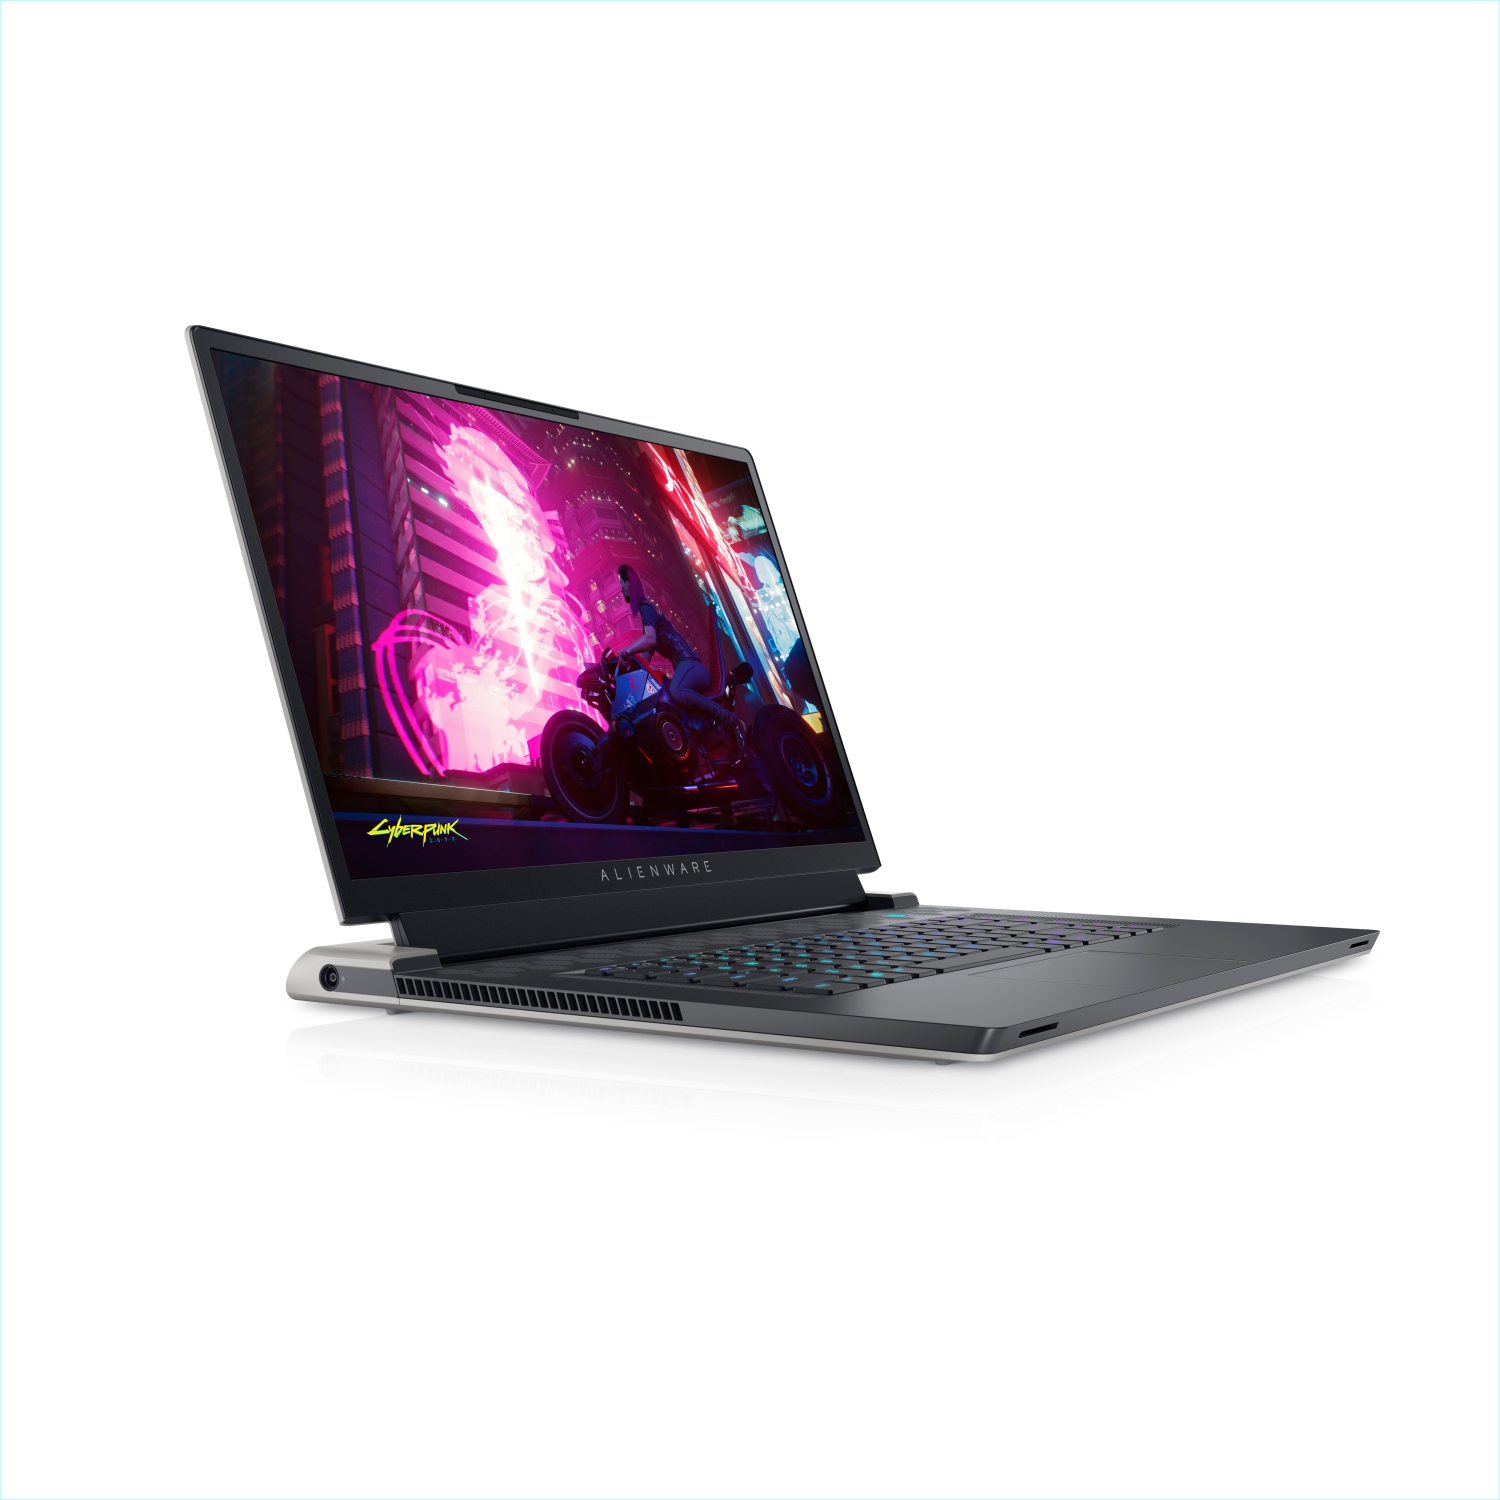 Refurbished (Excellent) - Dell Alienware X17 R1 Gaming Laptop (2021), 17.3" FHD, Core i7, 1TB SSD + 512GB SSD, 16GB RAM, RTX 3070, 4.6 GHz, 11th Gen CPU Certified